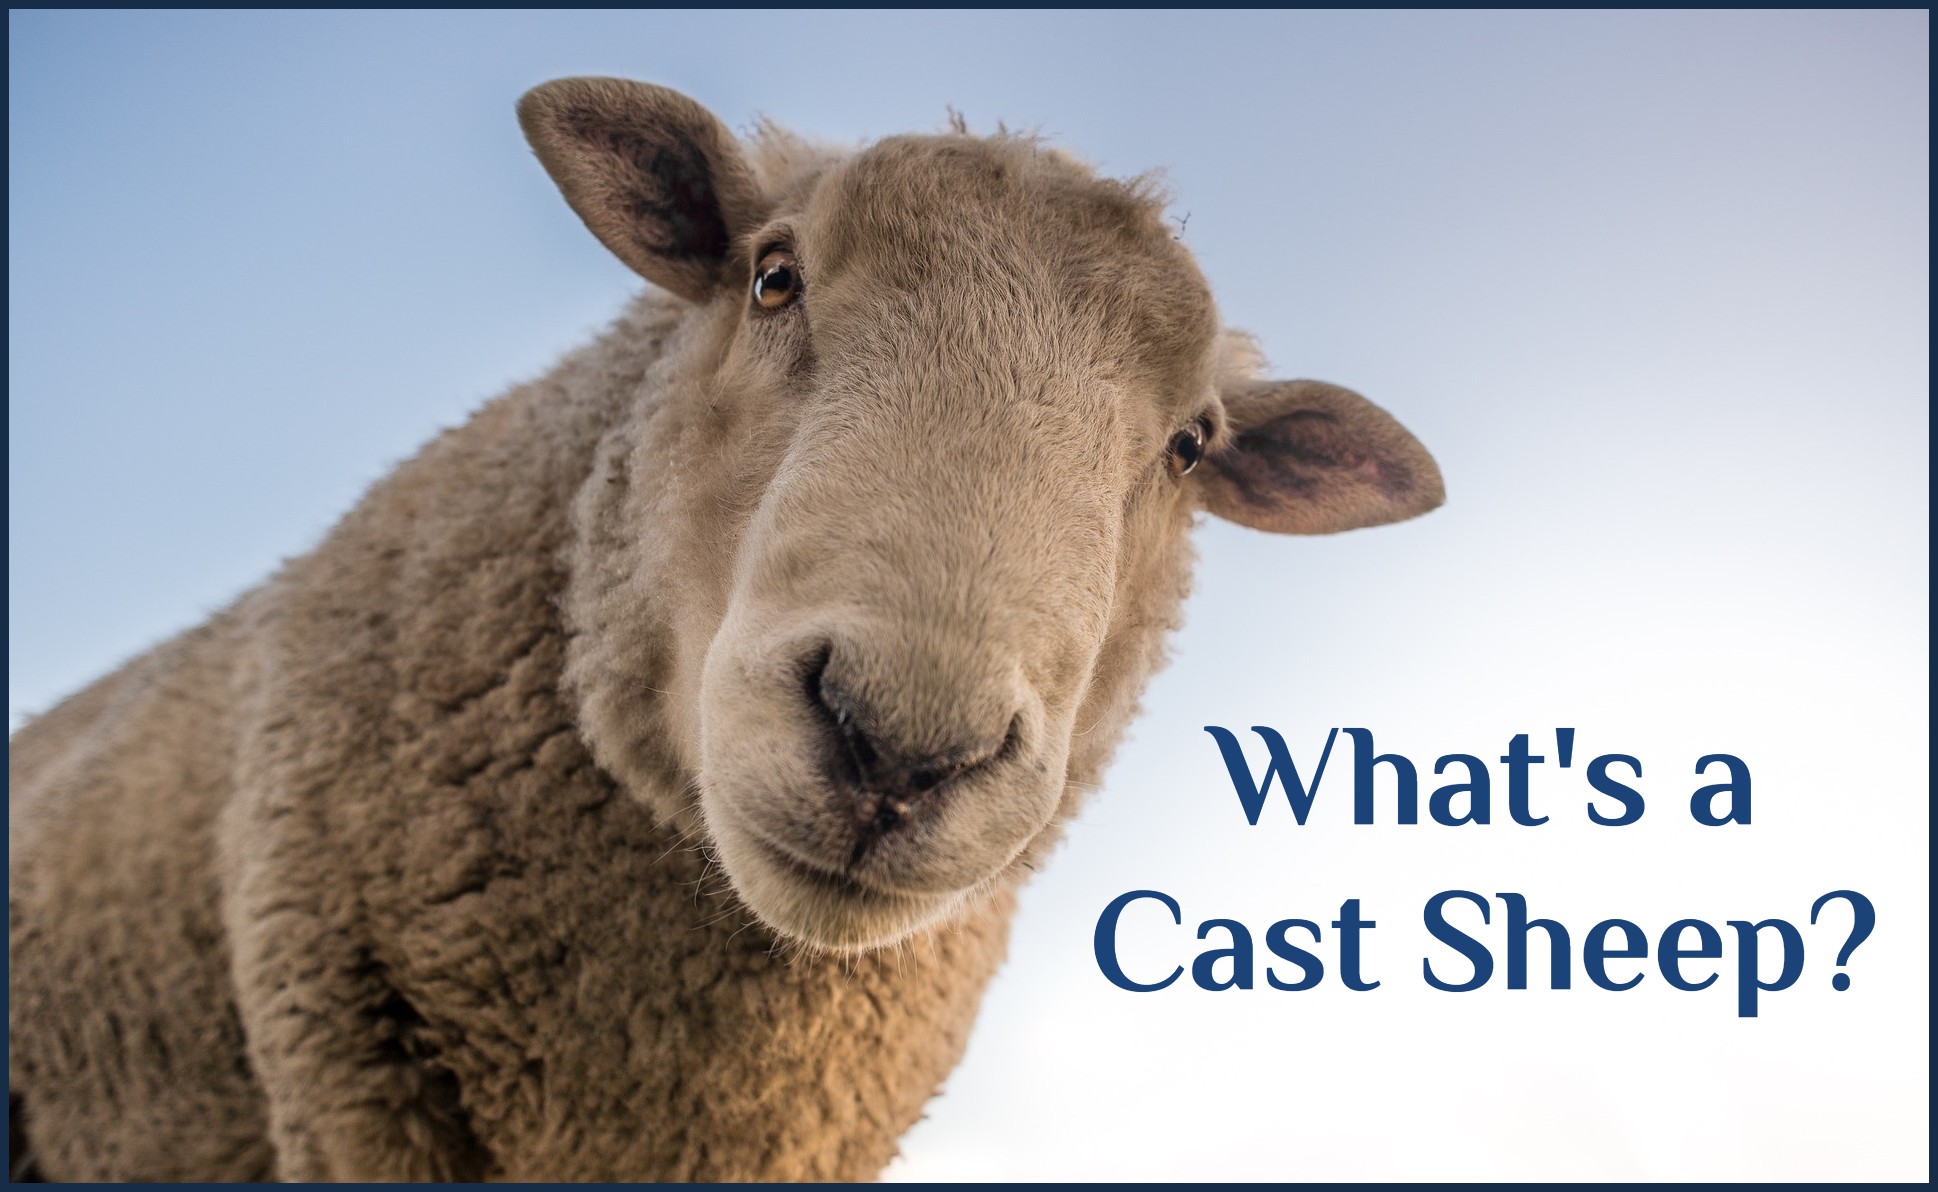 What’s a Cast Sheep?